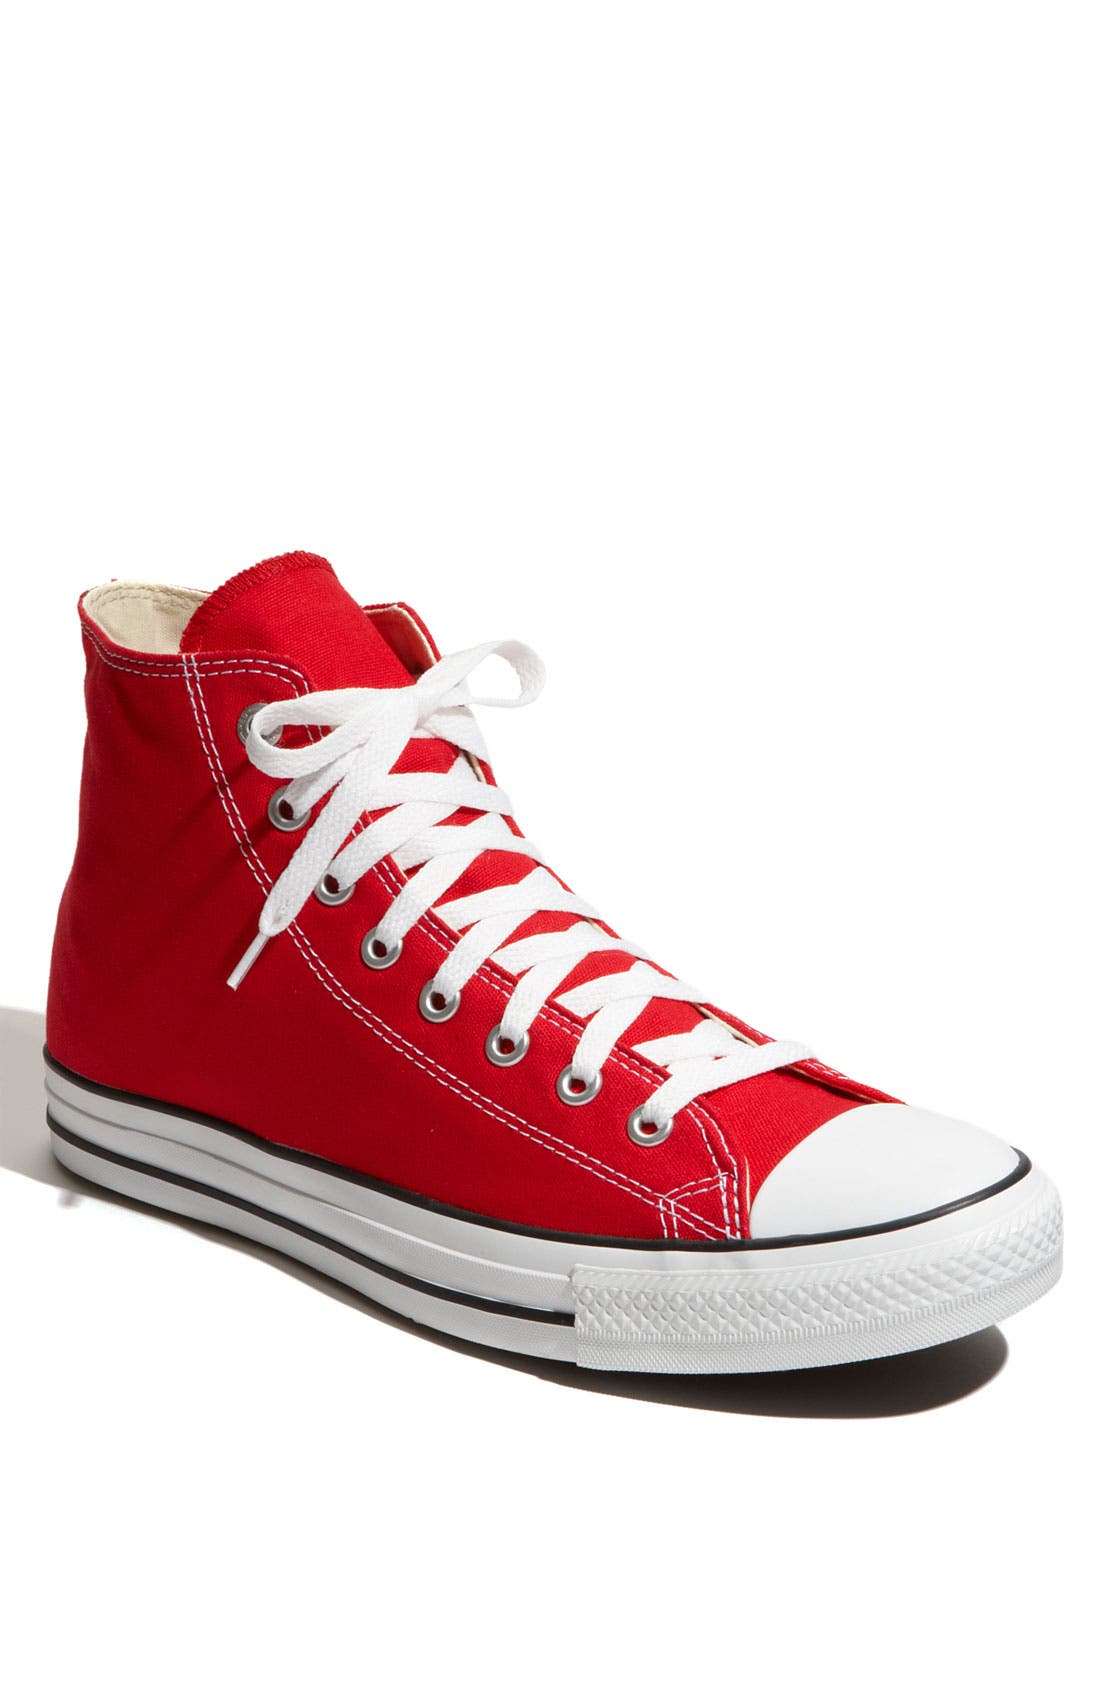 UPC 022859552349 product image for Converse Chuck Taylor(R) All Star(R) High Top Sneaker in Red at Nordstrom, Size  | upcitemdb.com